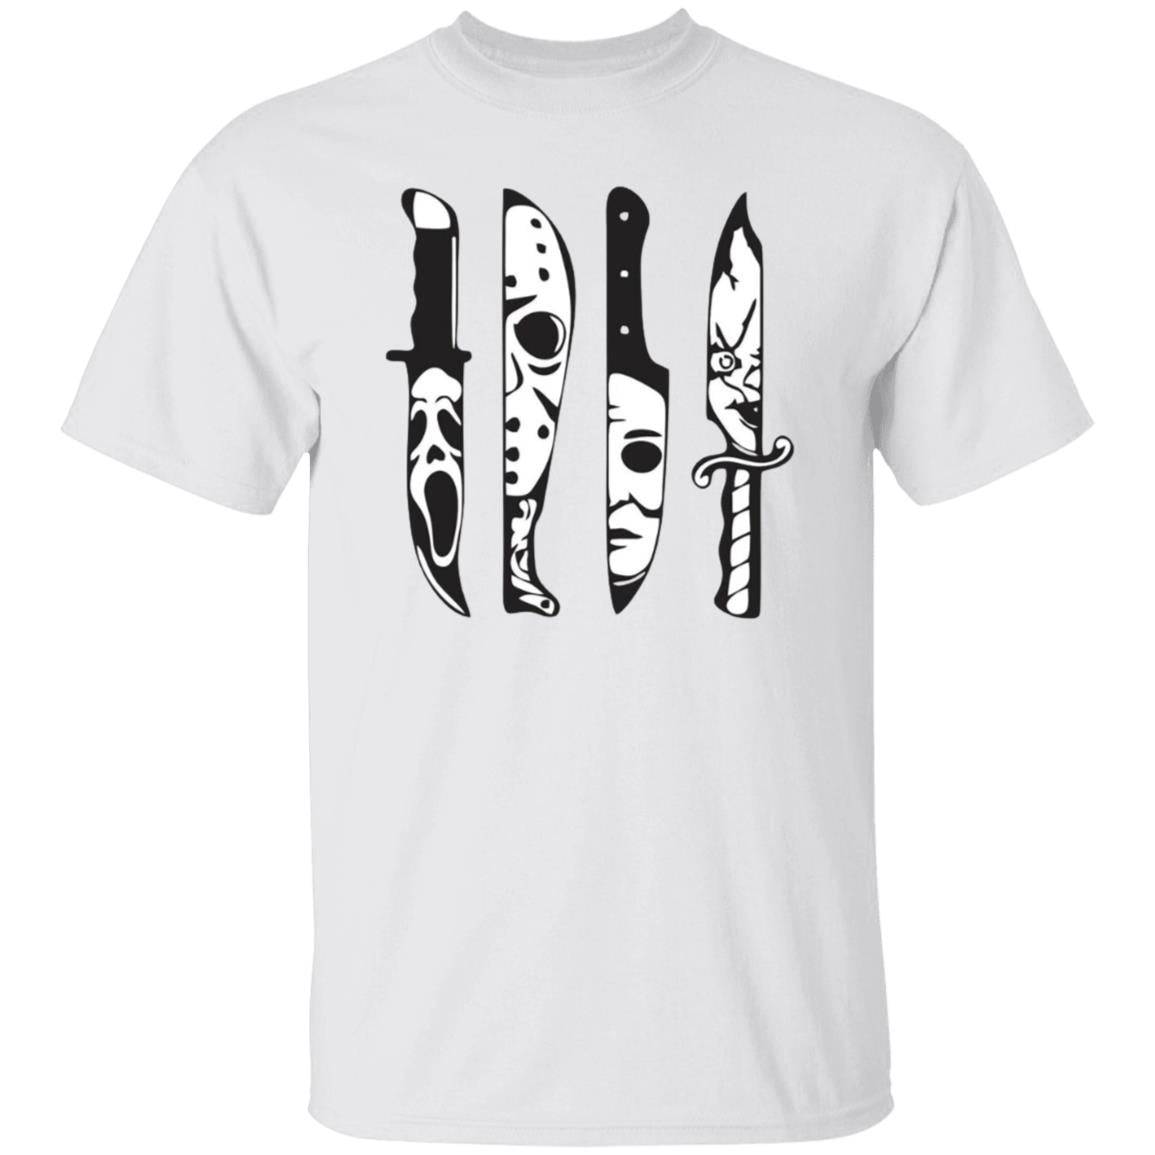 White unisex Halloween t-shirt with four knives across the front. In the reflection of each knife shows the face of a killer from a famous horror movie (Ghostface,  Jason Voorhees, Michael Myers and Chucky).